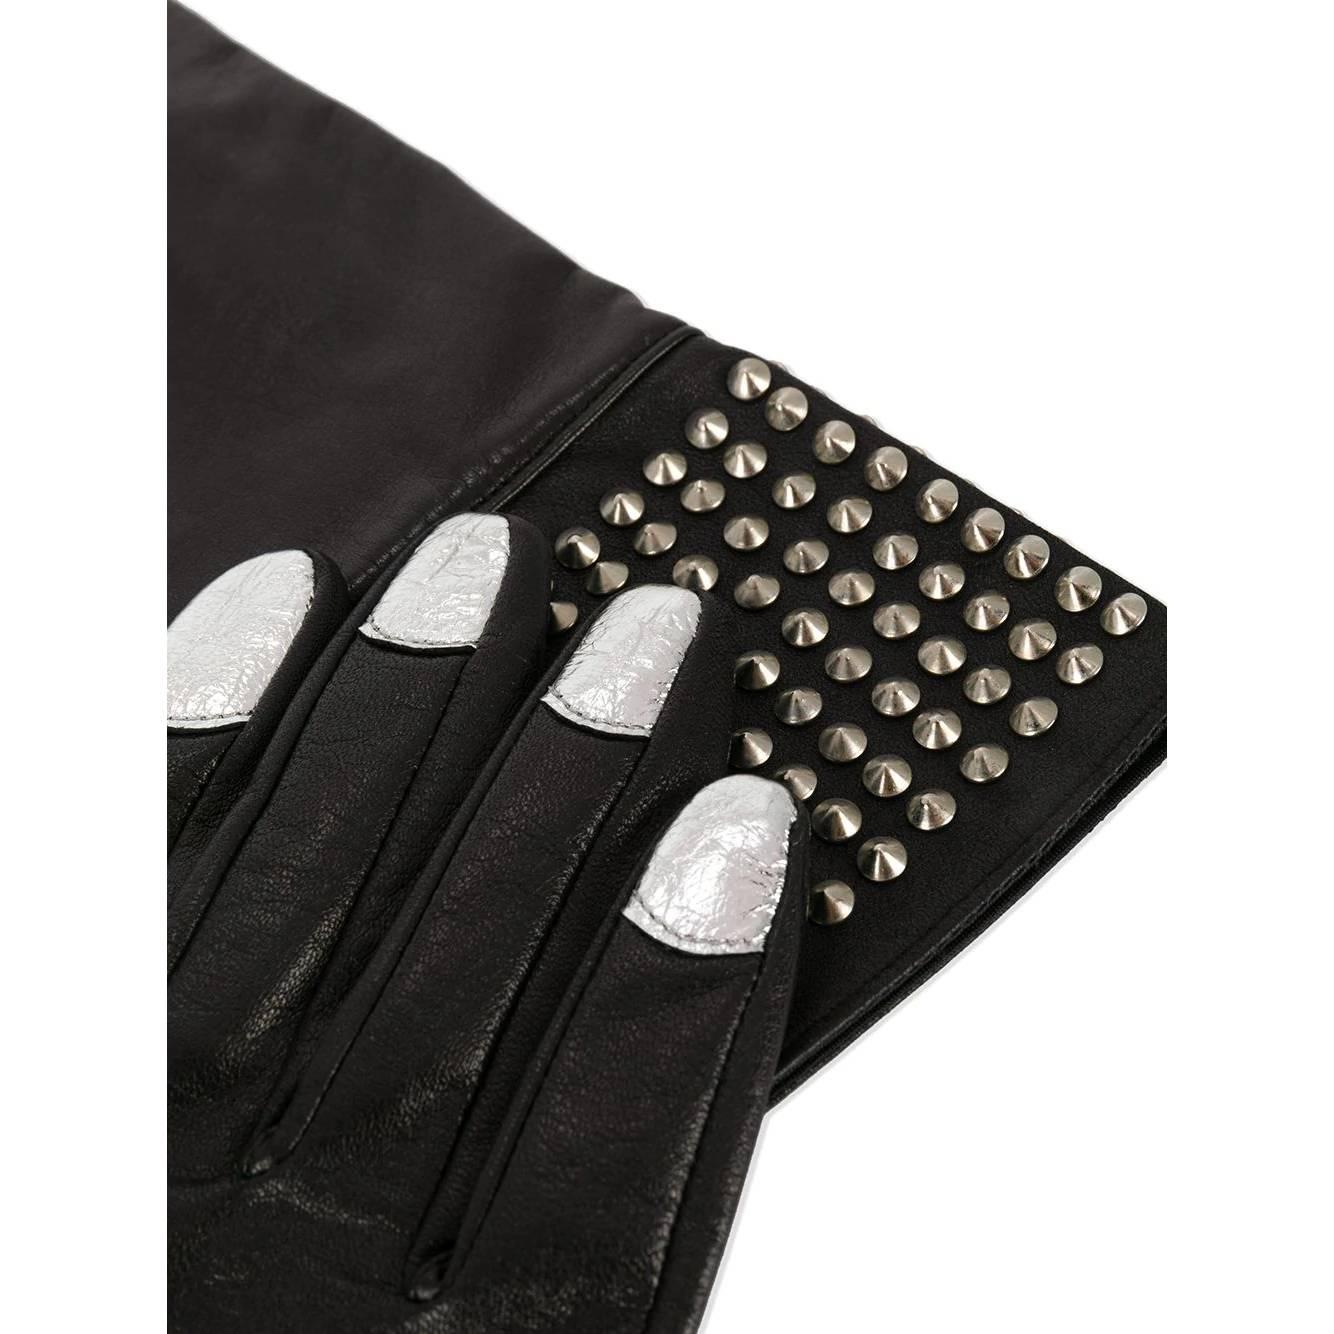 Yohji Yamamoto black leather gloves with decorative tiny studs and silver inserts on the fingertips.

Measurements
Width: 16,5 cm

Product code: A5623

Composition: Leather

Made in: Japan

Condition: Very good conditions